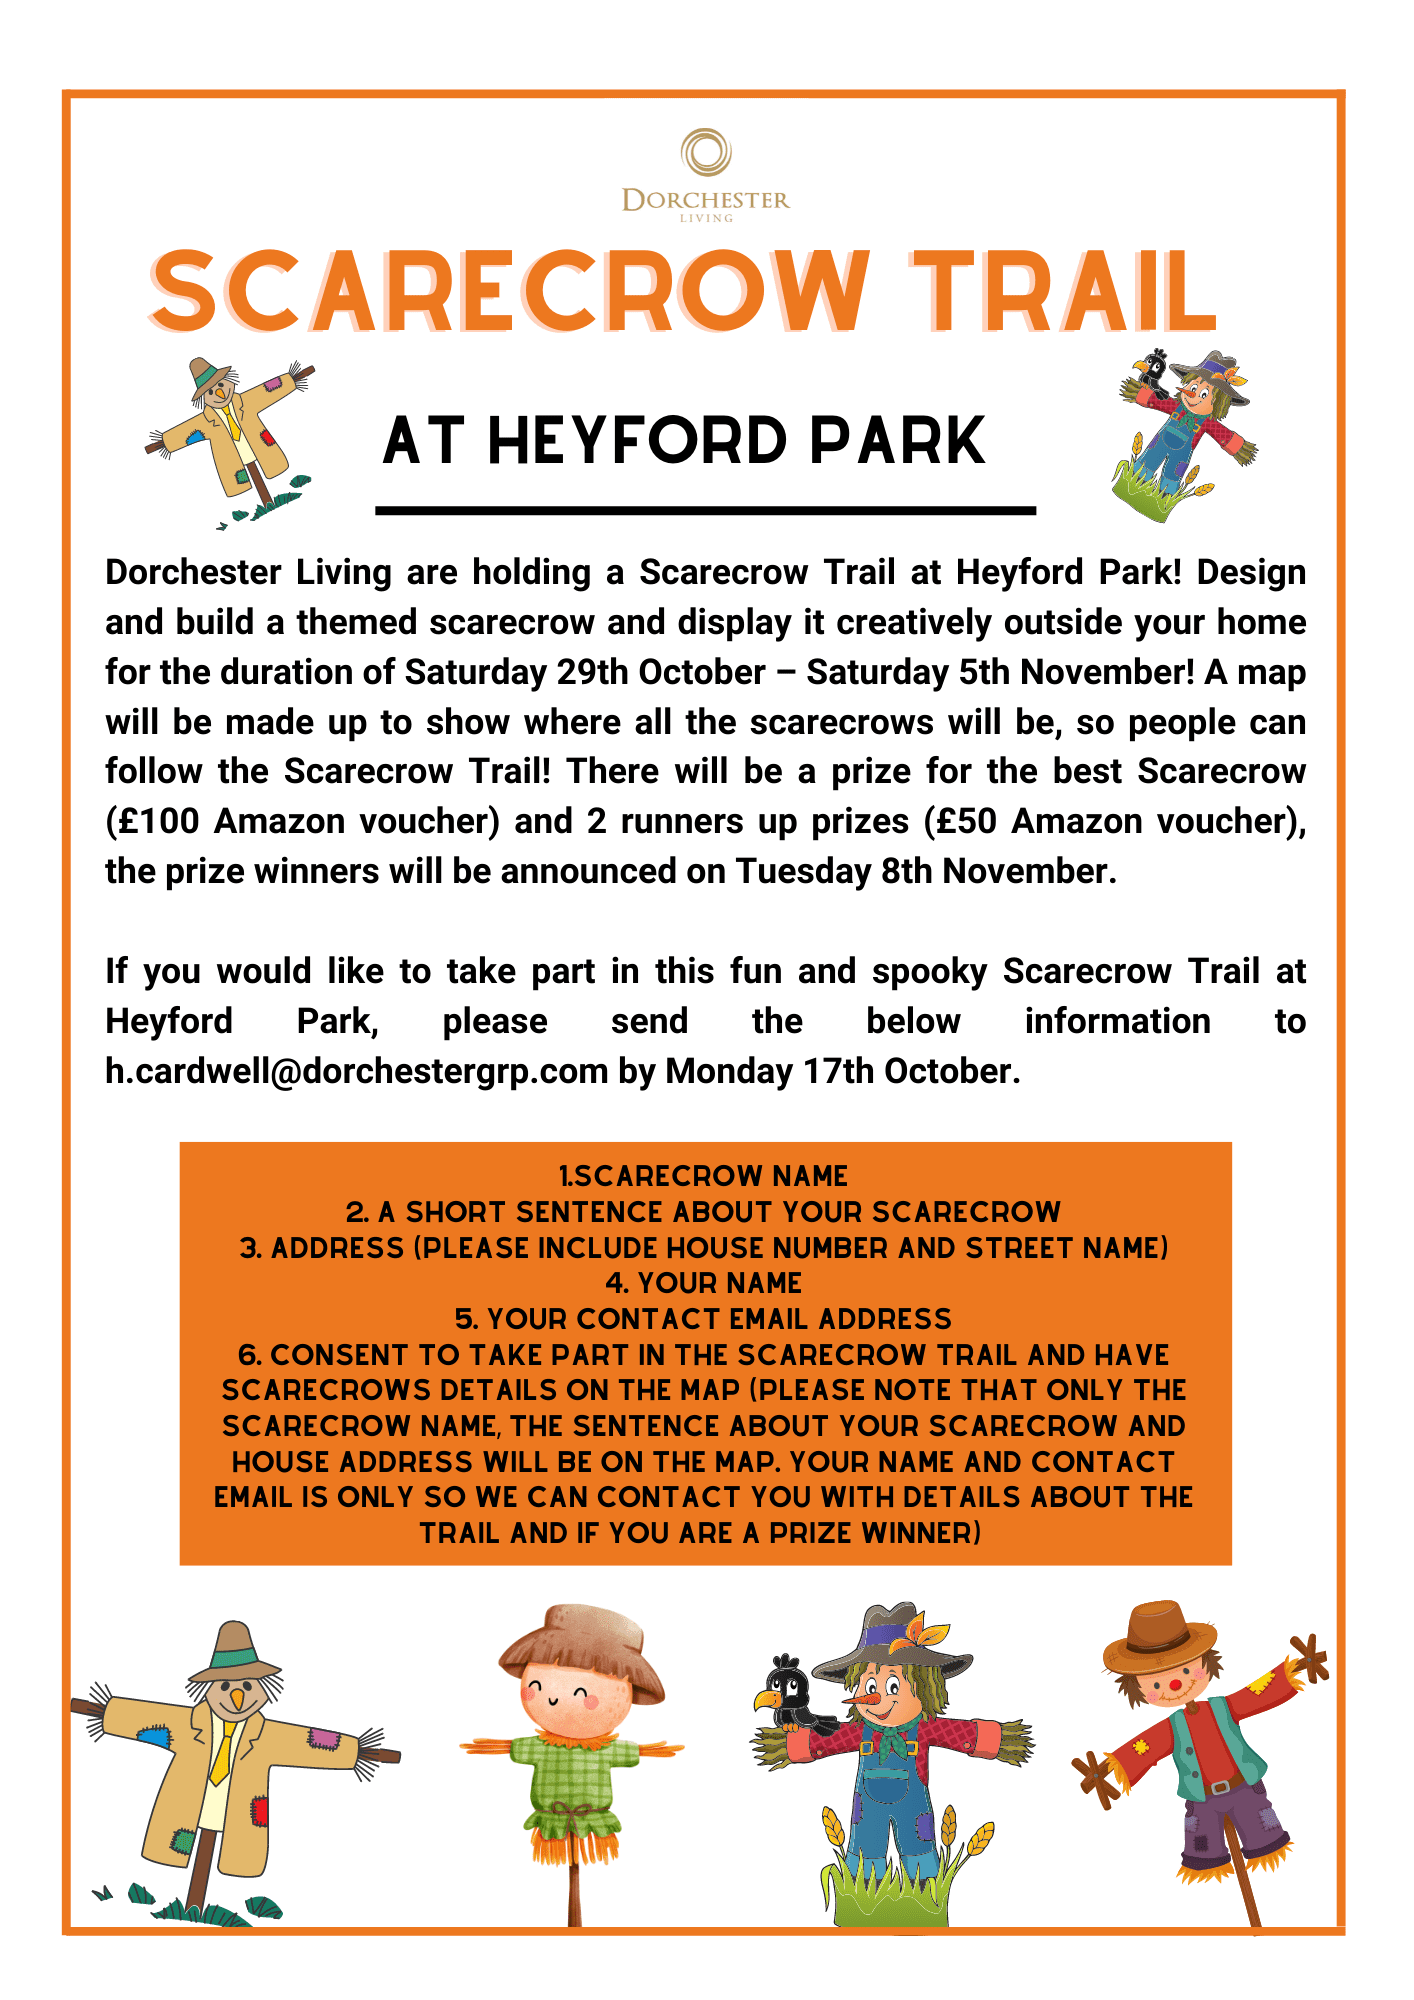 Scarecrow trail at Heyford Park